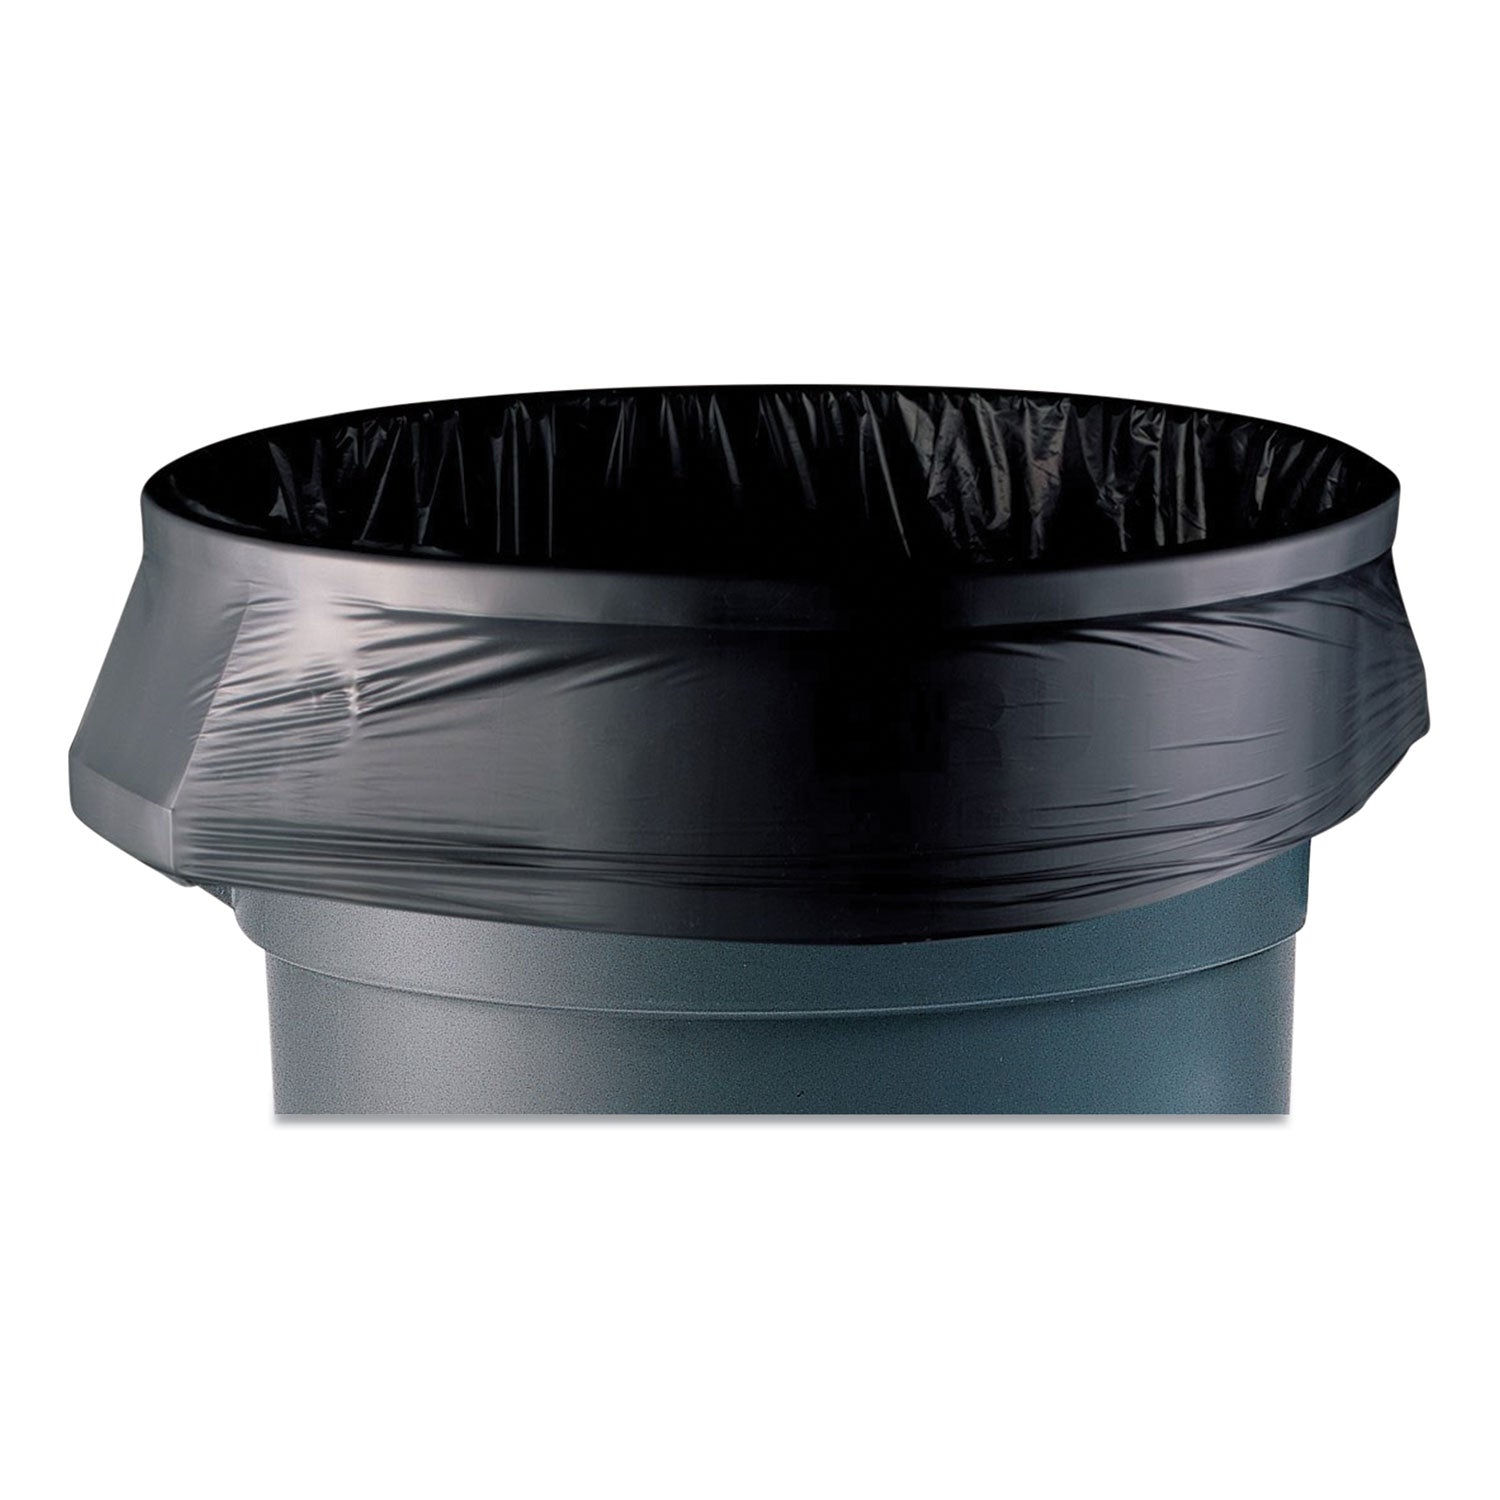 accufit-linear-low-density-can-liners-44-gal-13-mil-37-x-50-black-20-bags-roll-5-rolls-carton_cwz472383 - 1